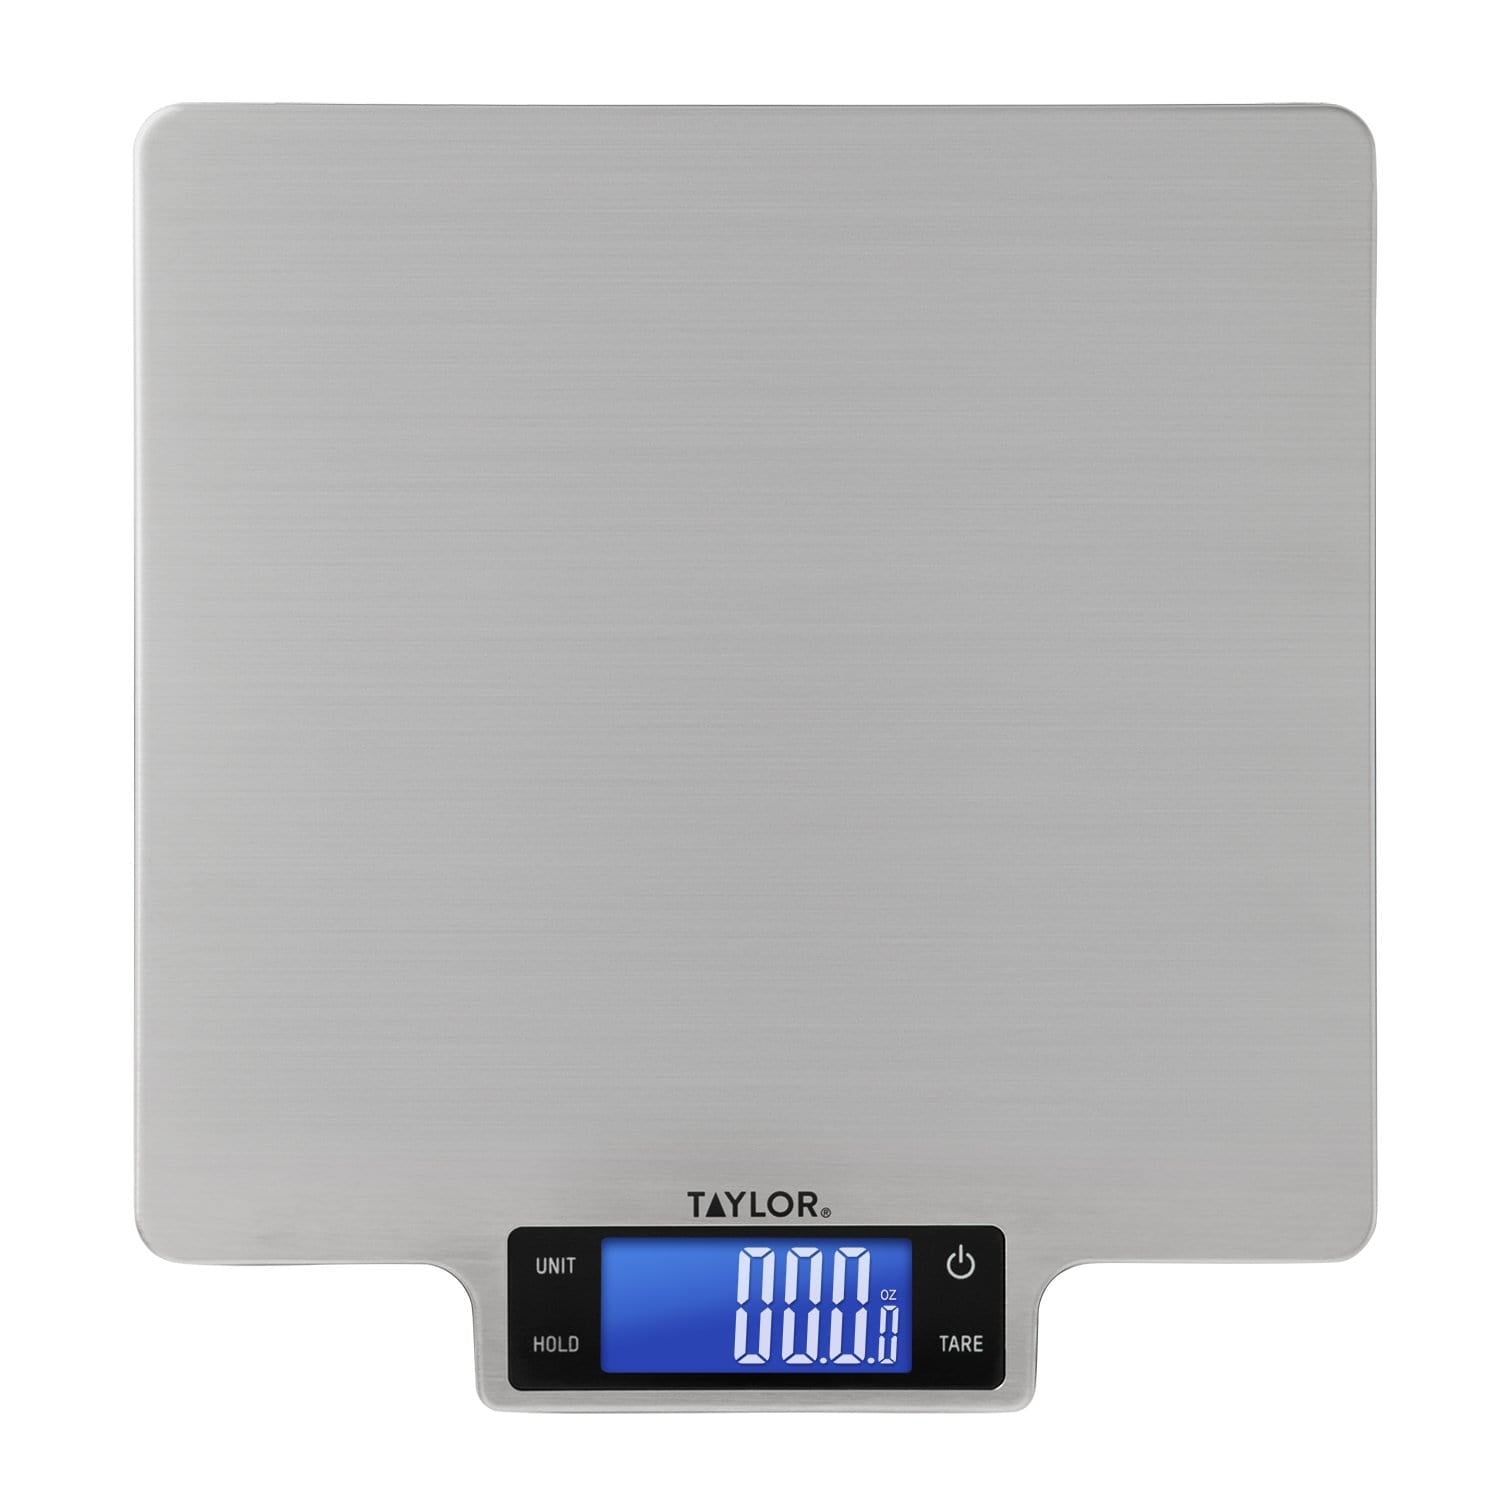 Insten Food Scale in Grams Ounces Digital Scale for Kitchen Diet